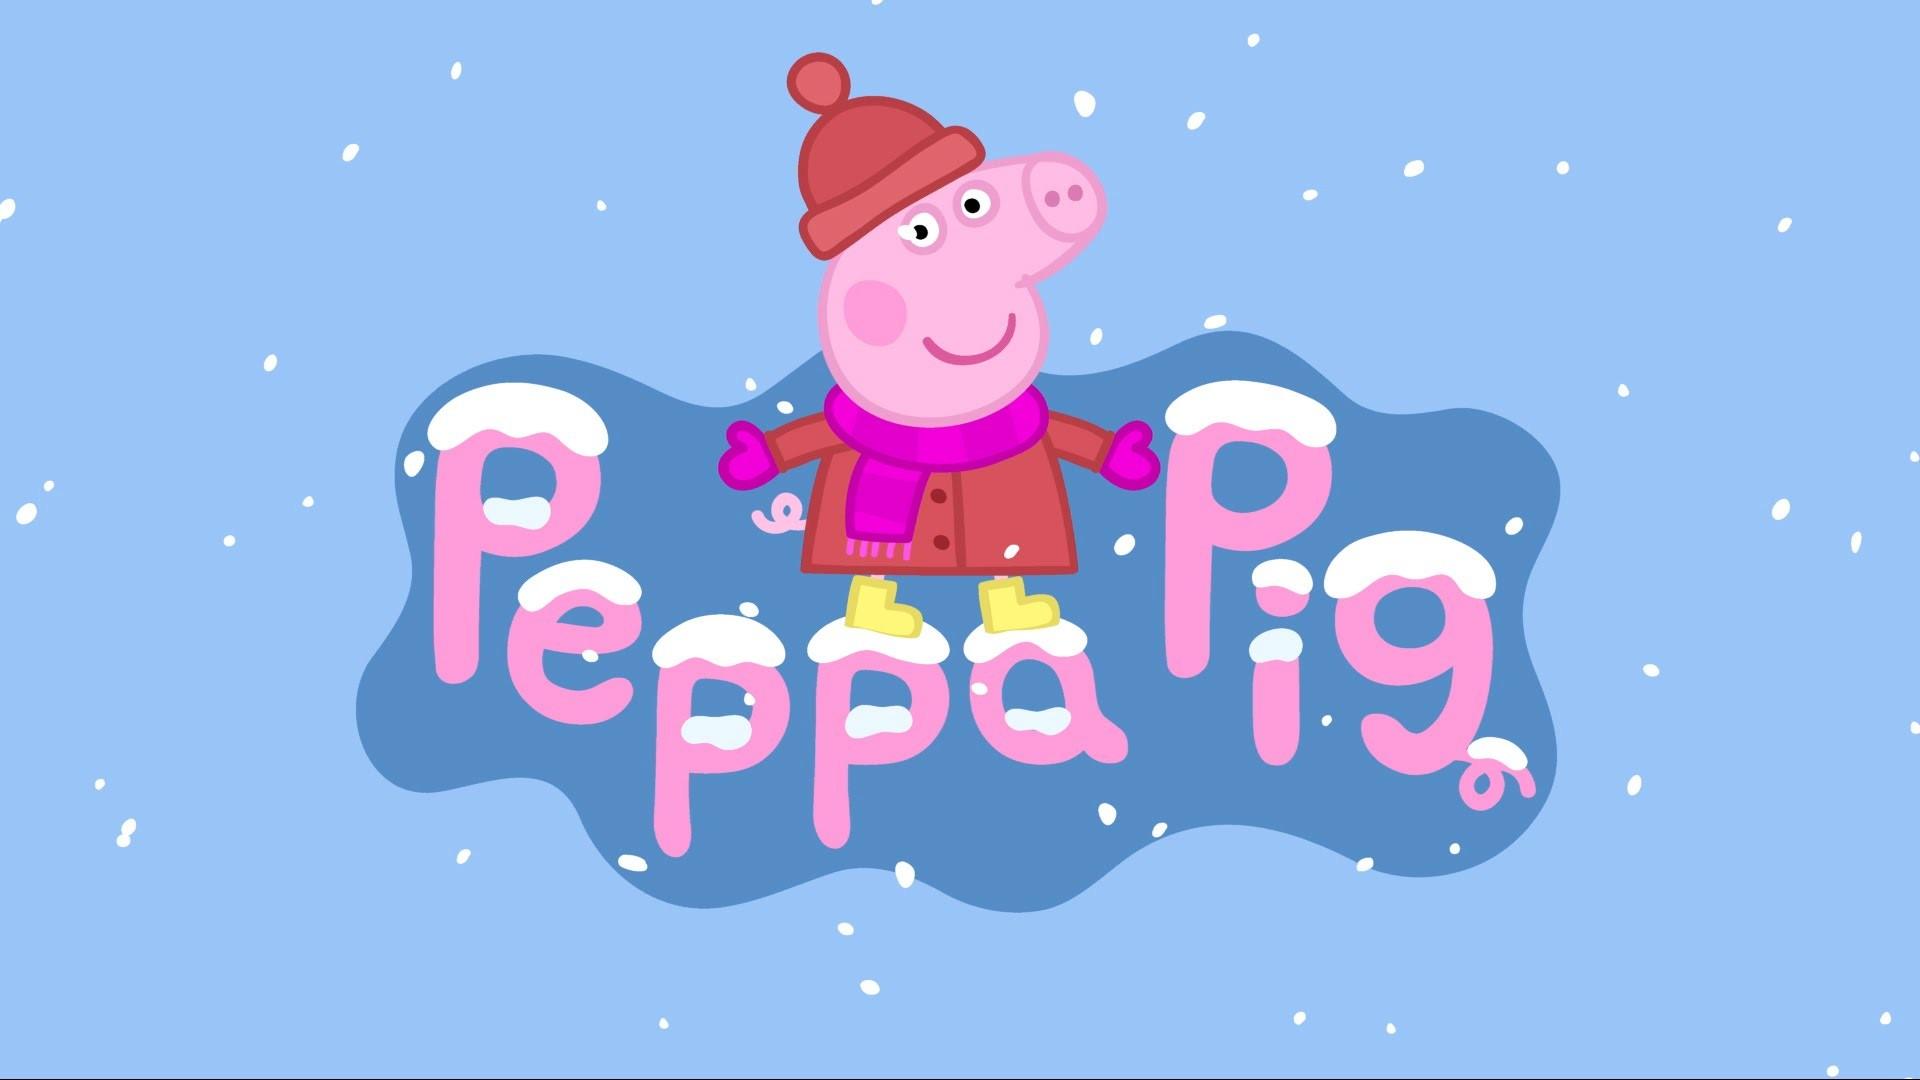 Scary Peppa Pig Wallpapers - Wallpaper Cave